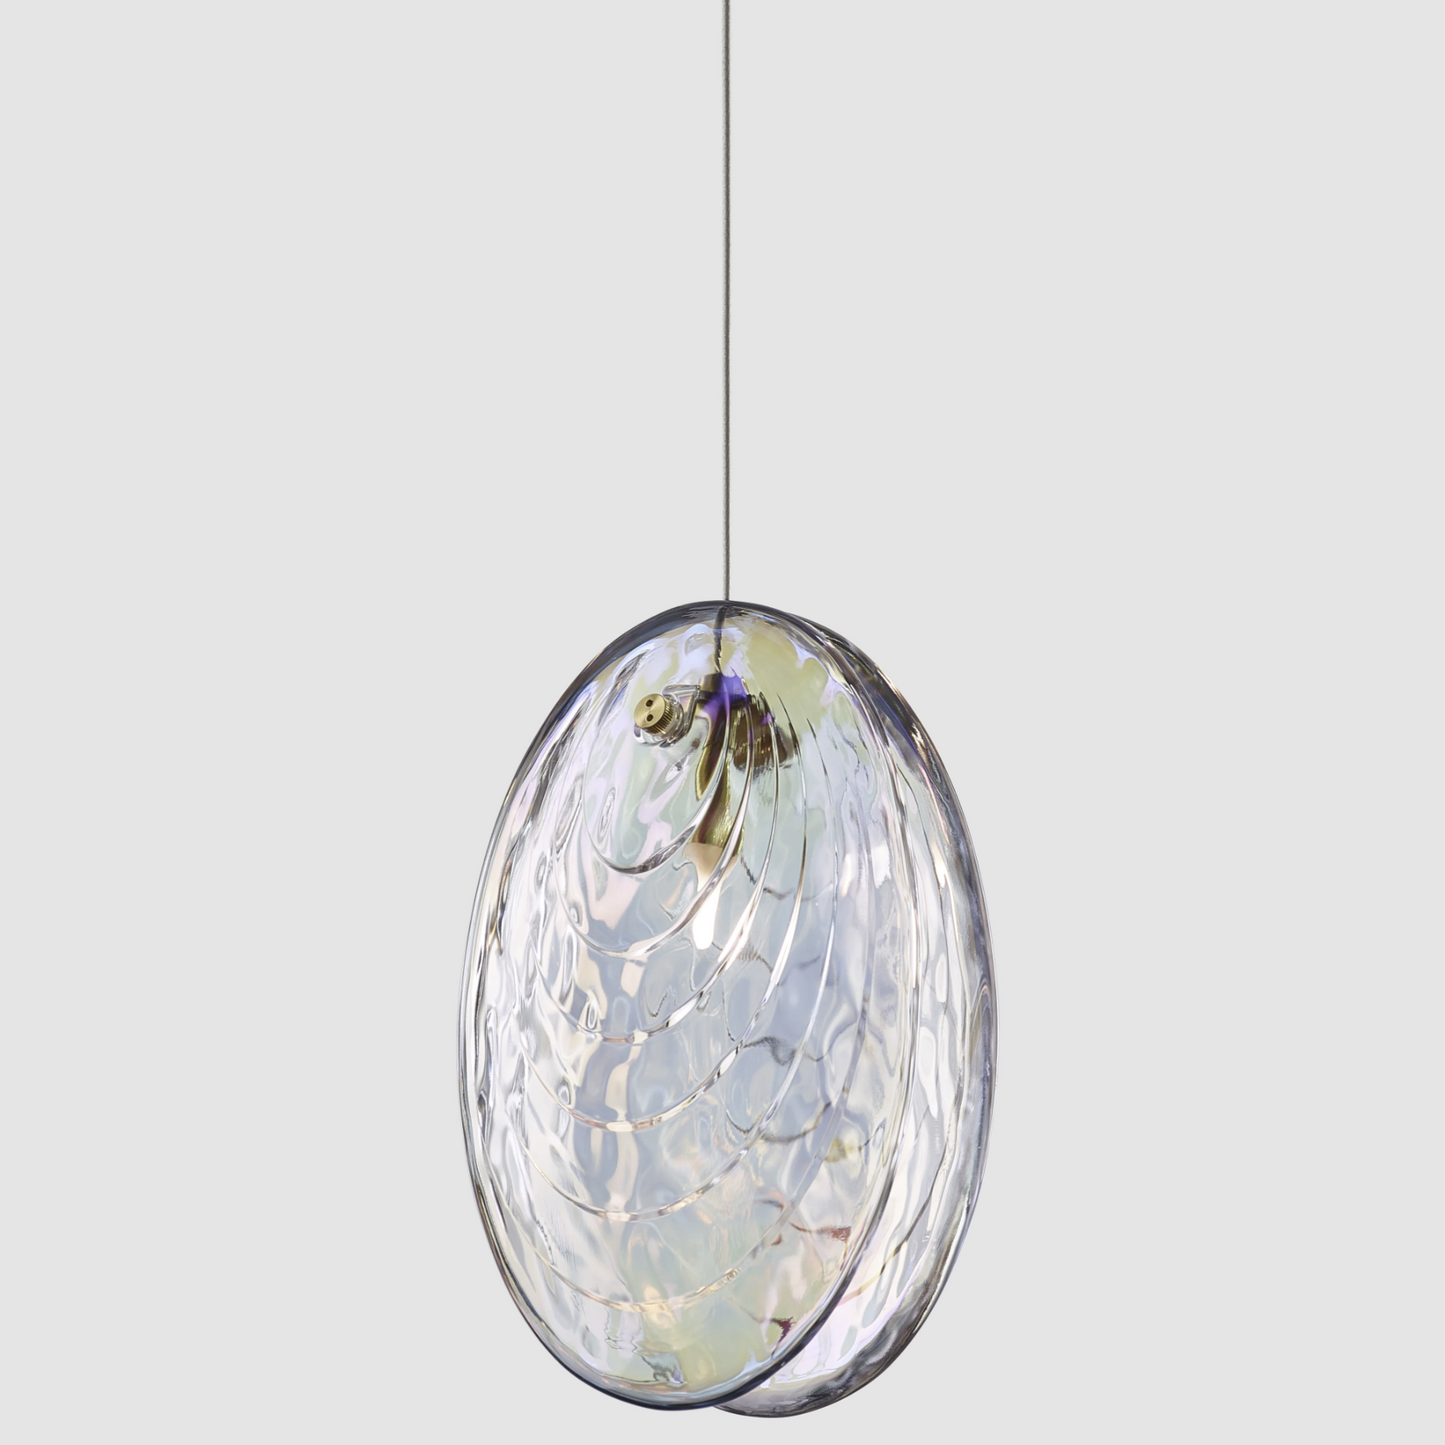 BOMMA - MUSSELS PENDANT - from $1,480.00